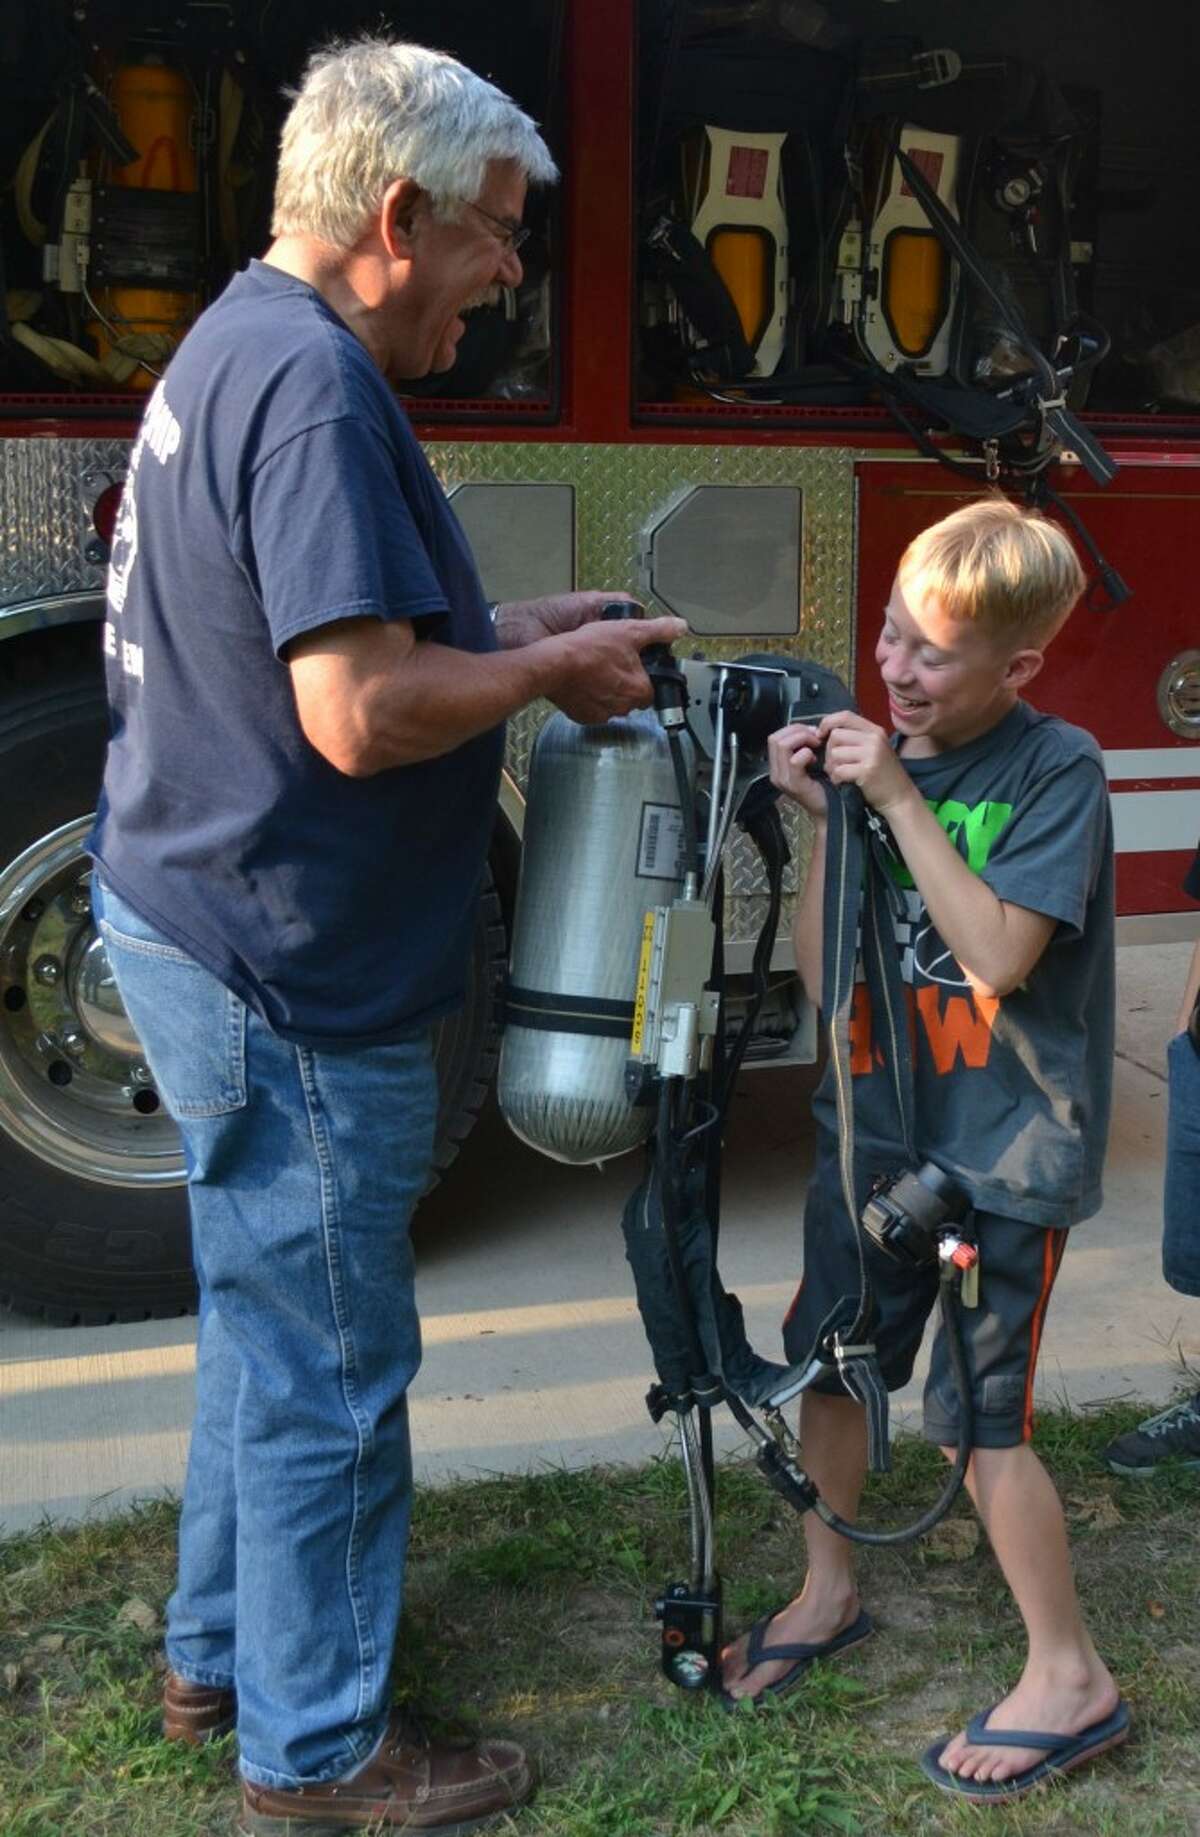 Norman Township Fire Chief John Gramza (LEFT) laughs as Tyler Duncan (RIGHT) attempts to lift a compressed air canister, a part of a firefighter's equipment that weighs between 25 and 50 pounds. (Meg LeDuc/News Advocate)